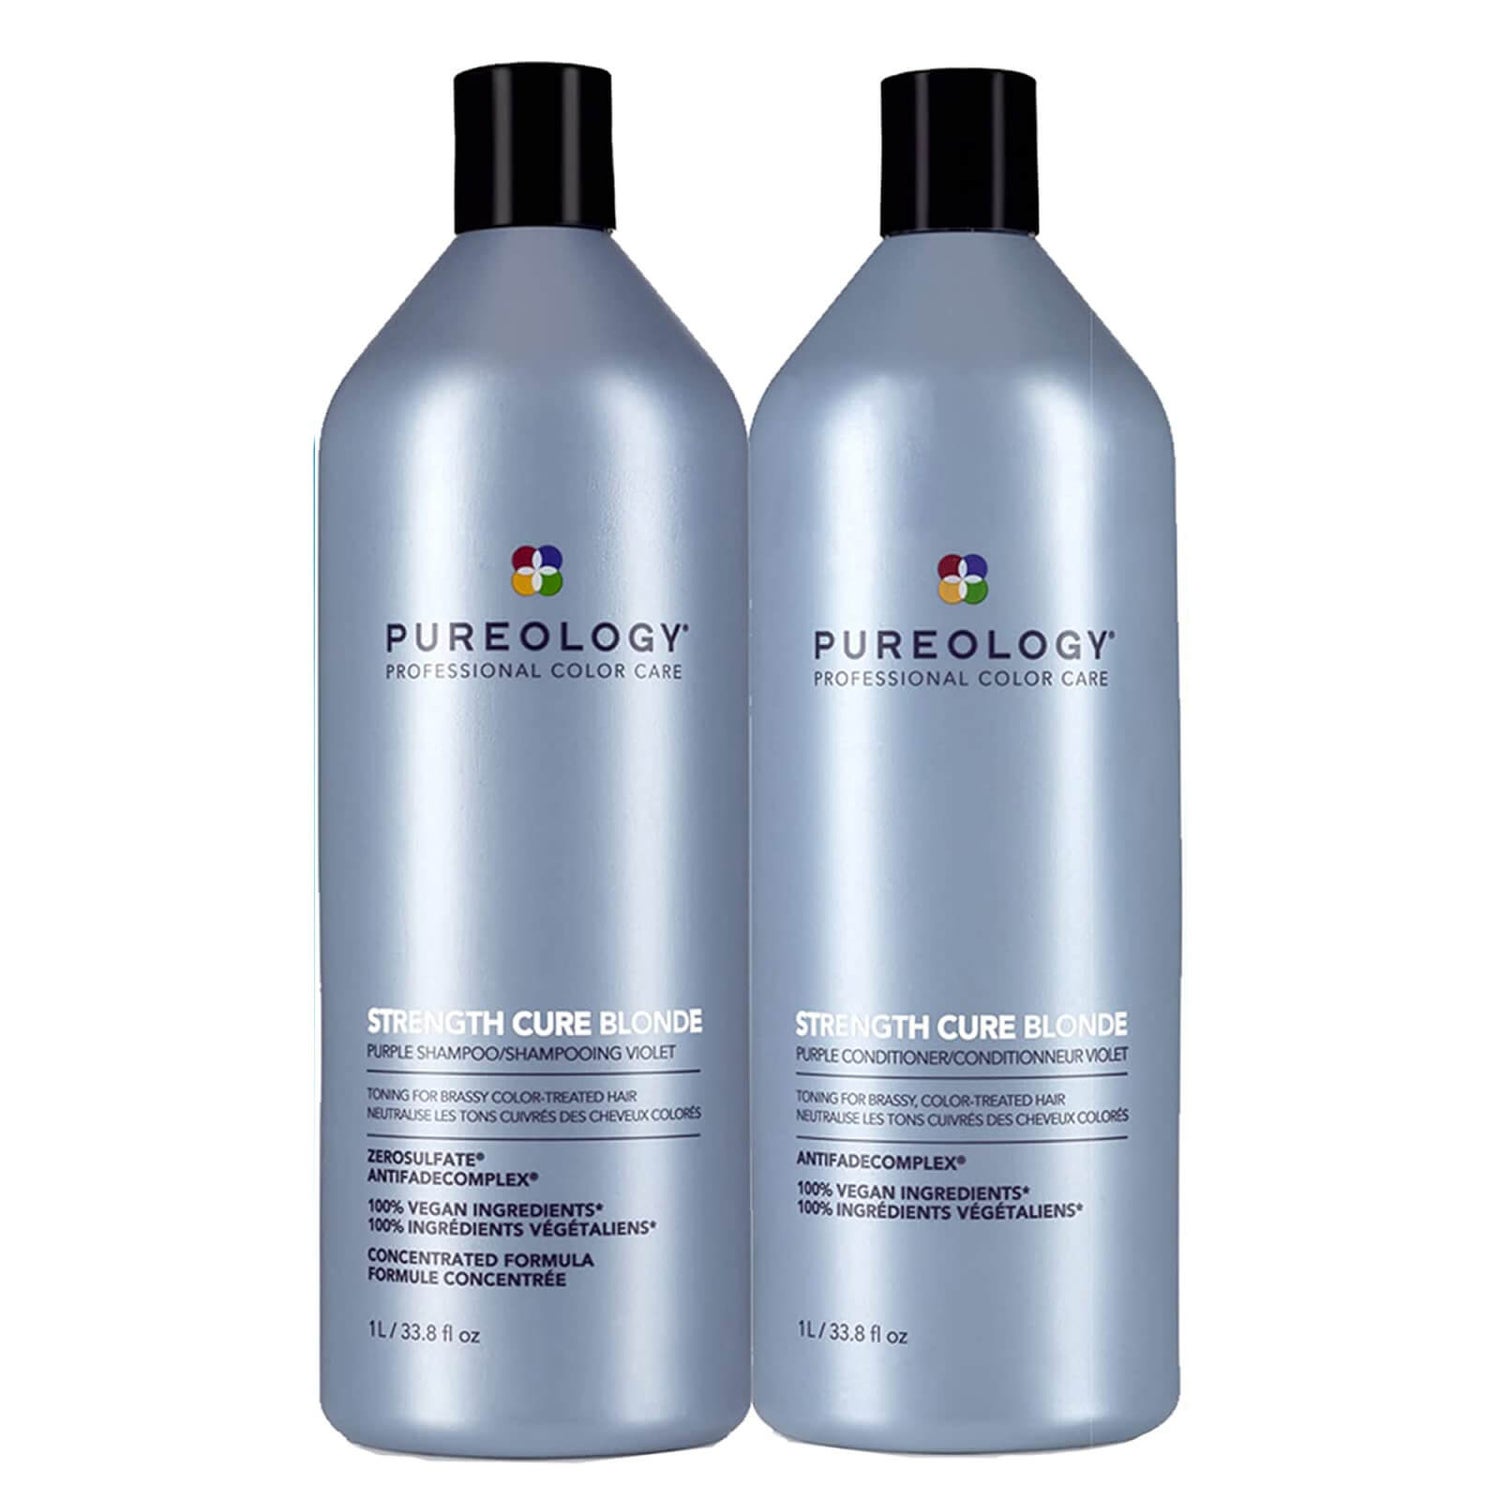 Pureology Strength Cure Blonde Shampoo and Conditioner Toning Routine ...